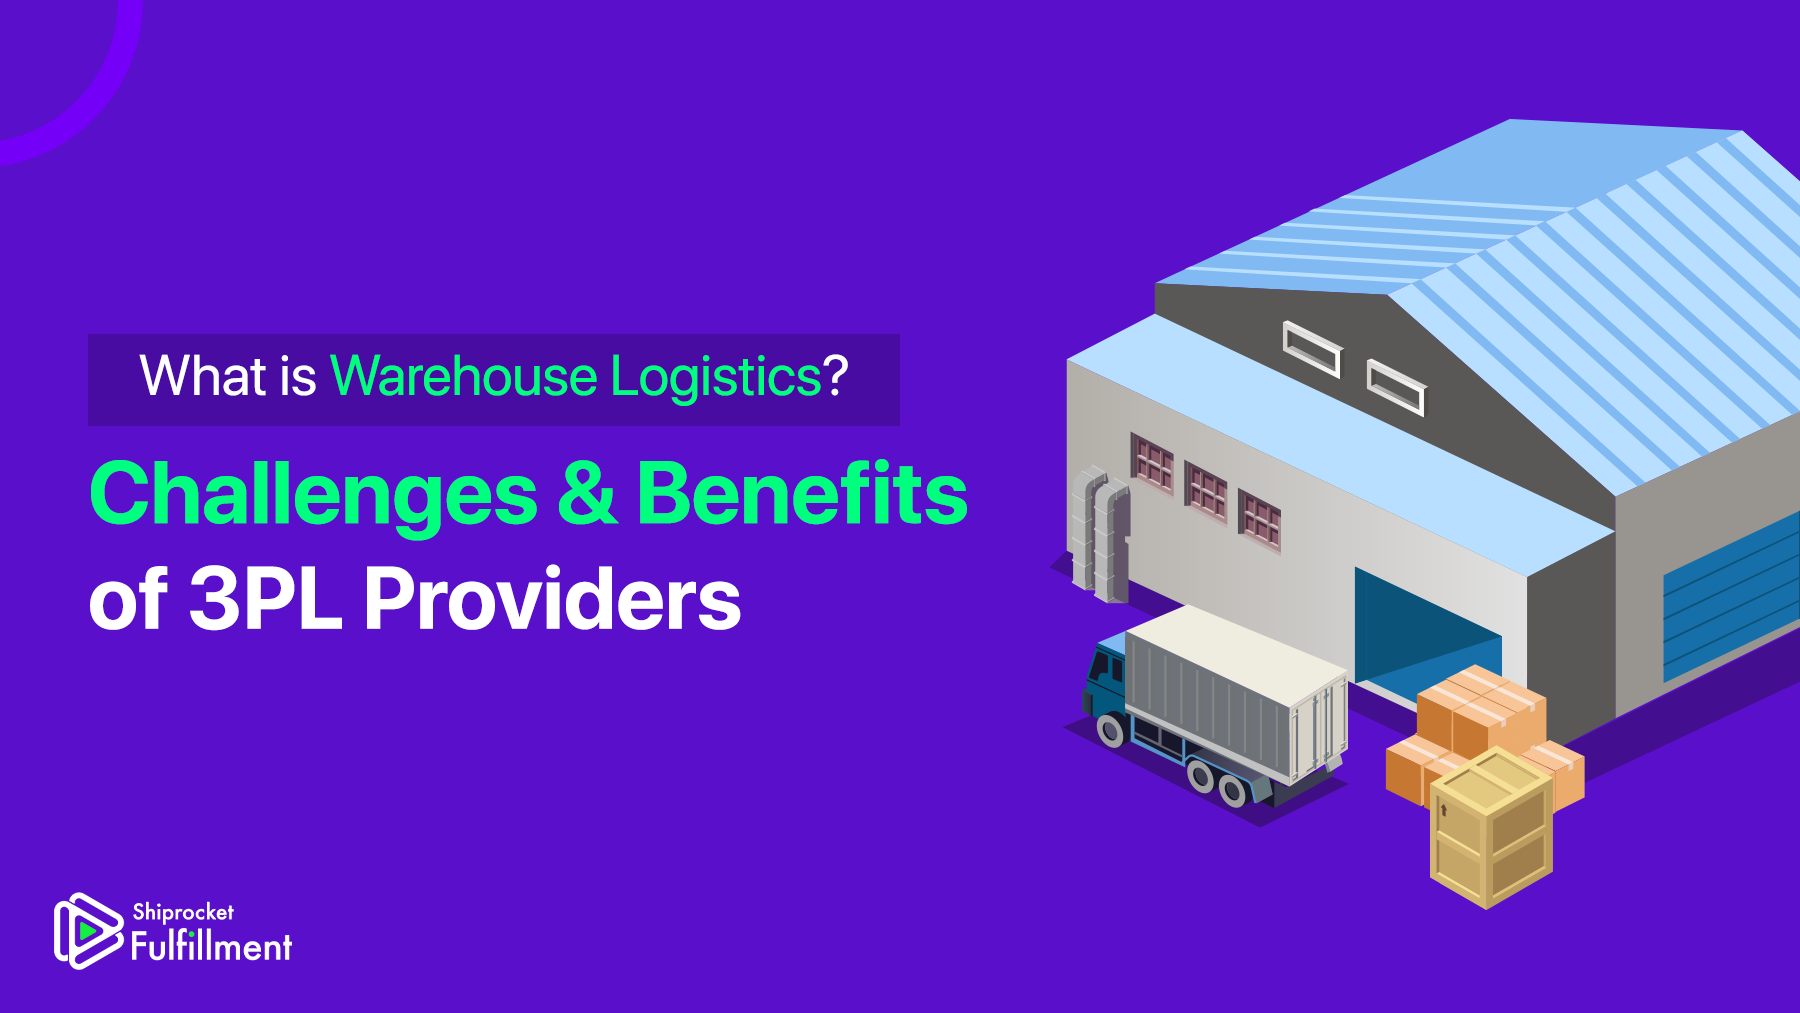 What is Warehouse Logistics? Challenges & Benefits - Shiprocket Fulfillment